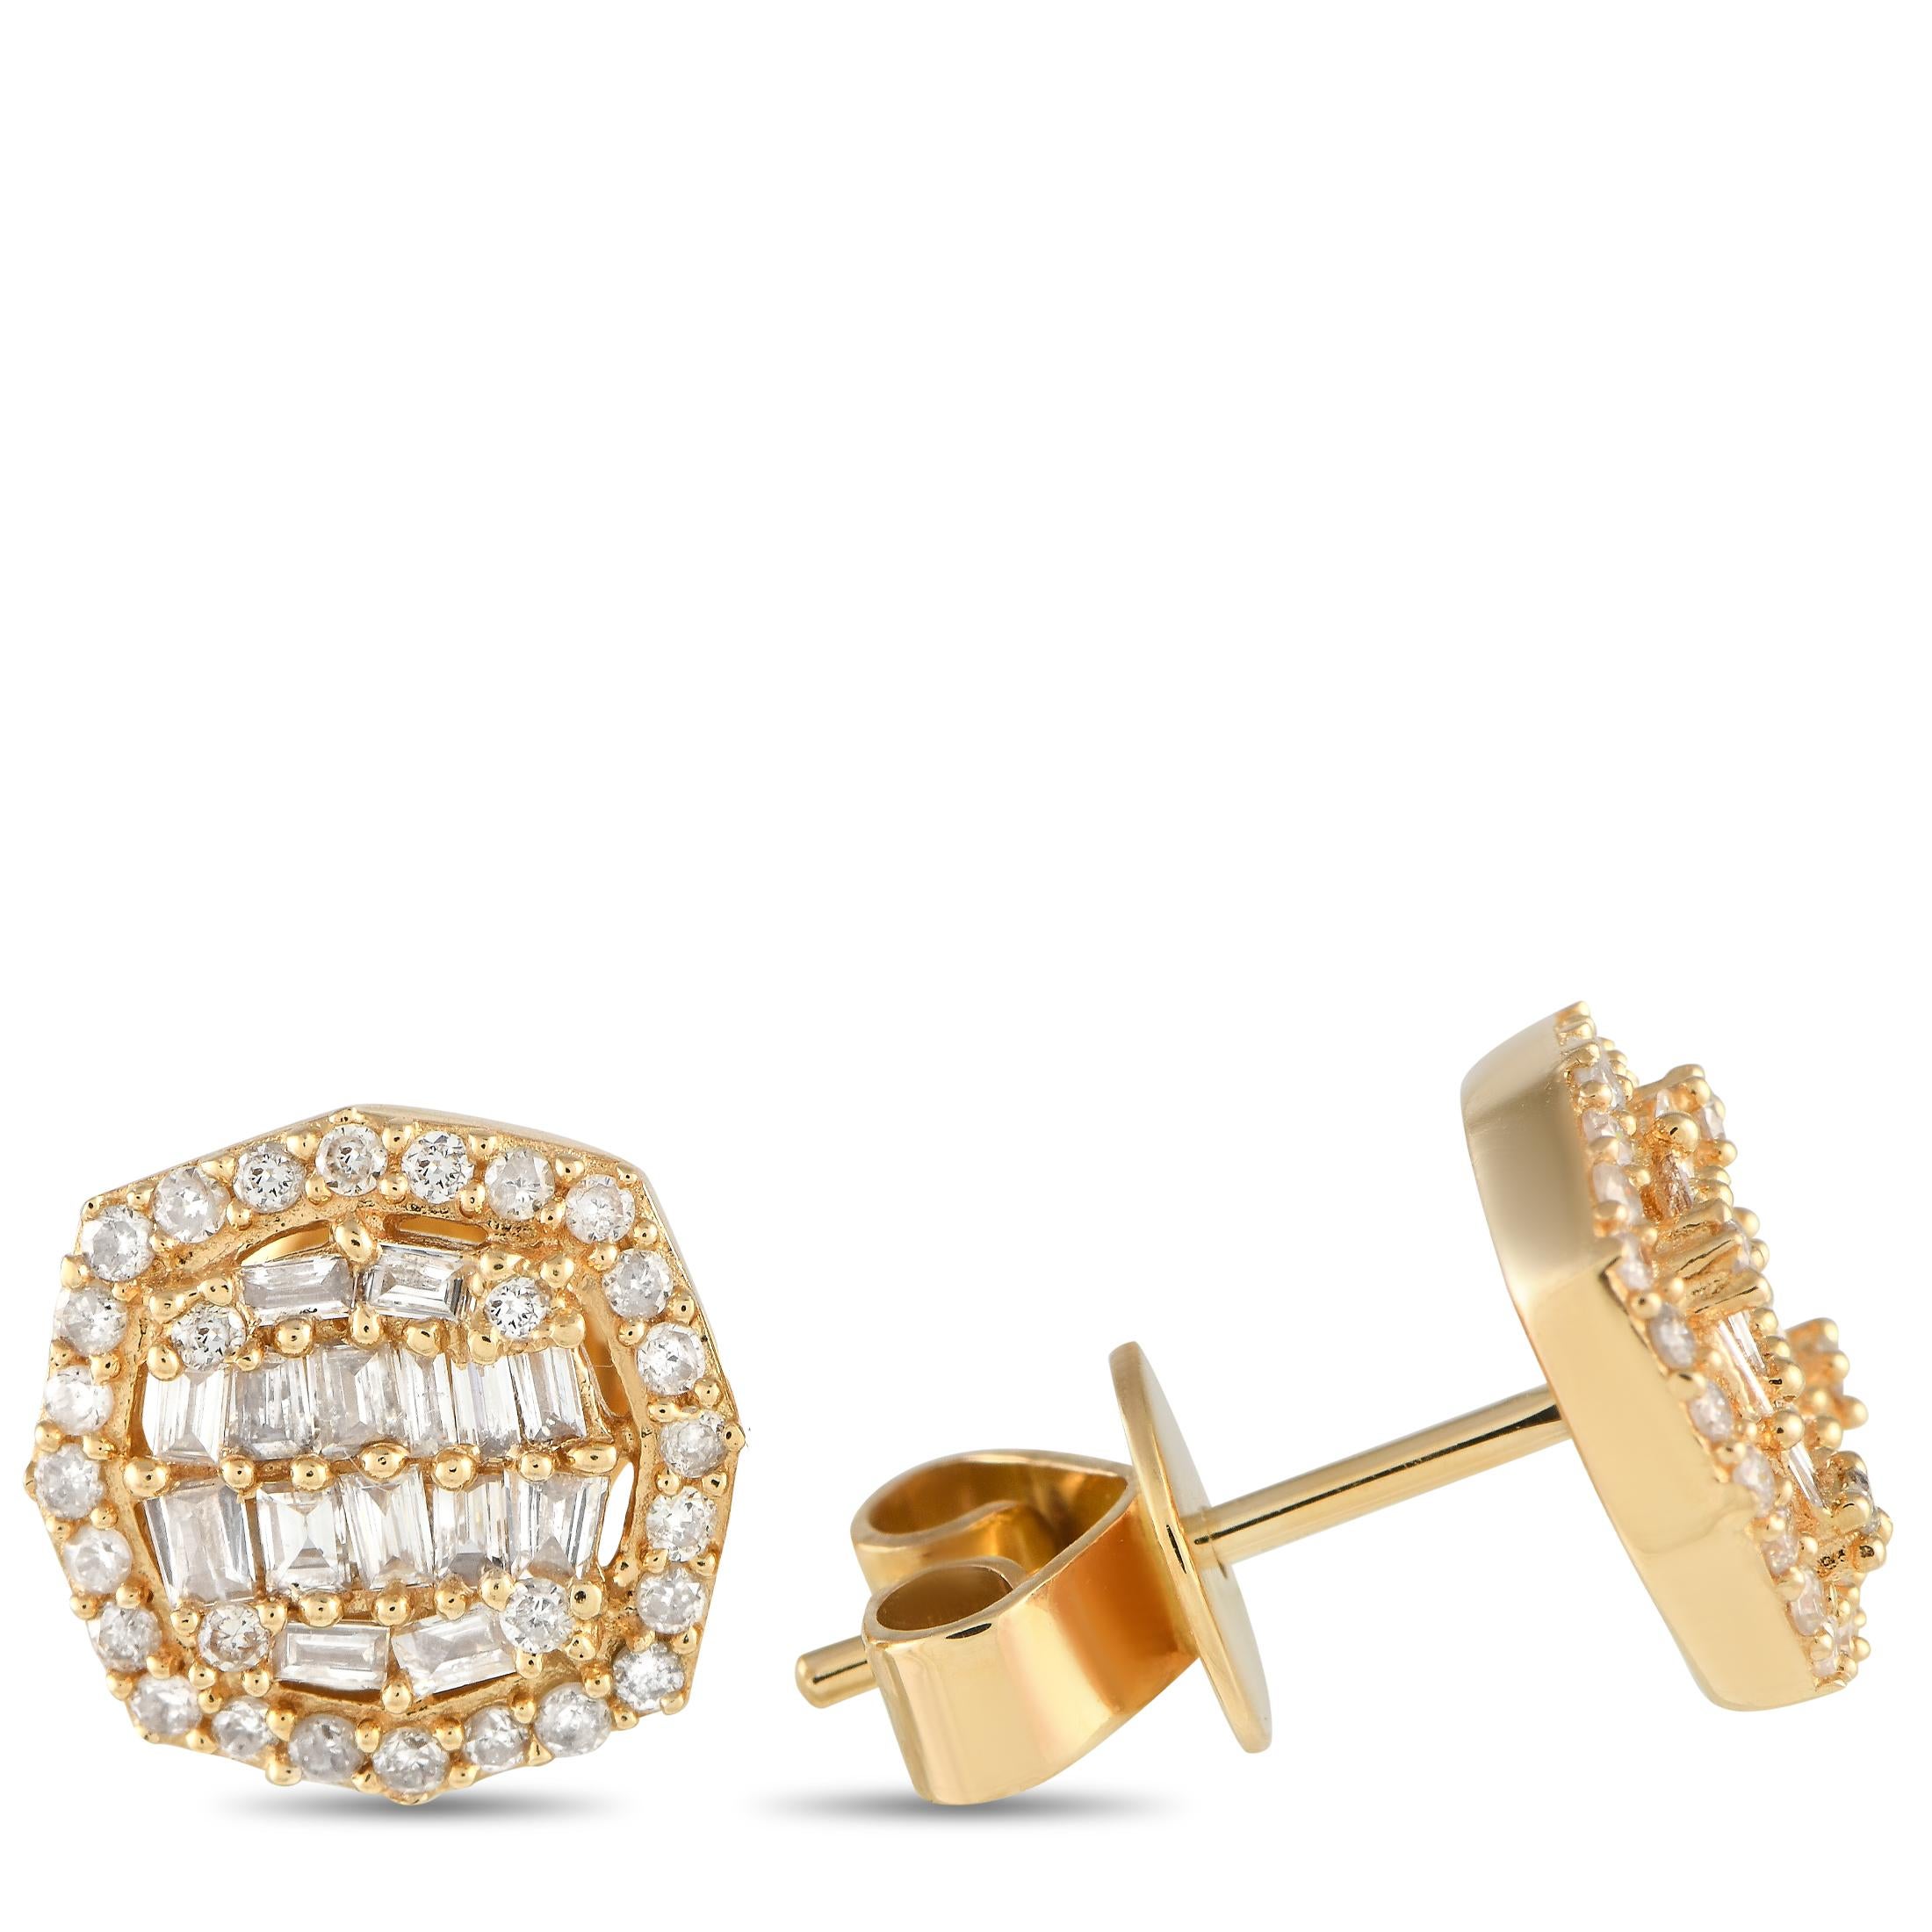 Look sharp with this pair of geometric diamond earrings. Each octagonal-shaped stud is crafted in 14K yellow gold and embellished with a cluster of step-cut diamonds. Tracing the eight-sided edge of each stud are round diamonds. This pair, with its